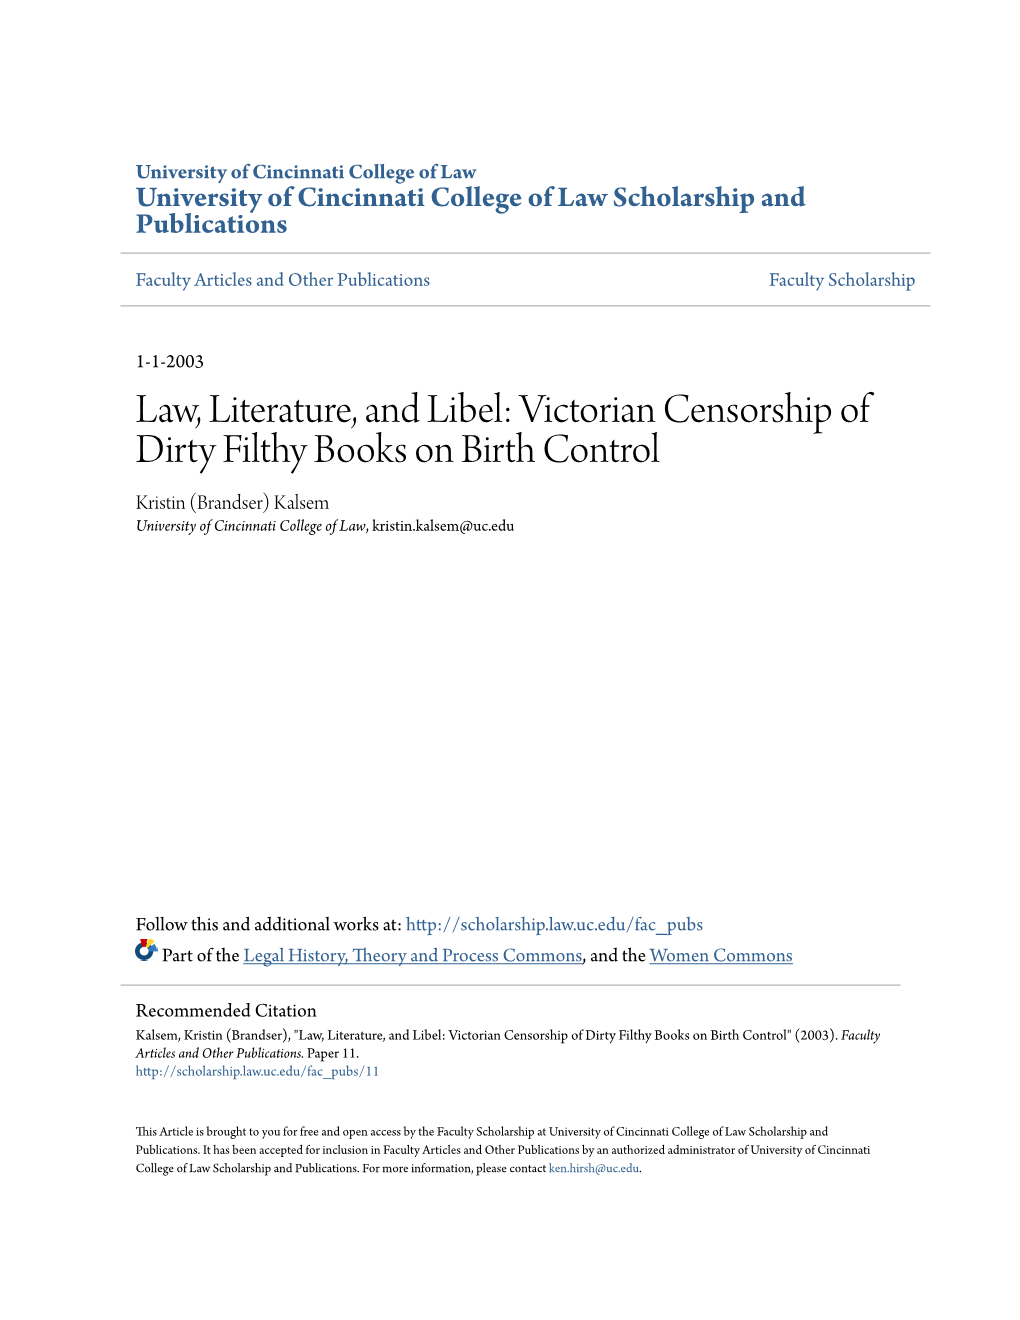 Law, Literature, and Libel: Victorian Censorship of Dirty Filthy Books On